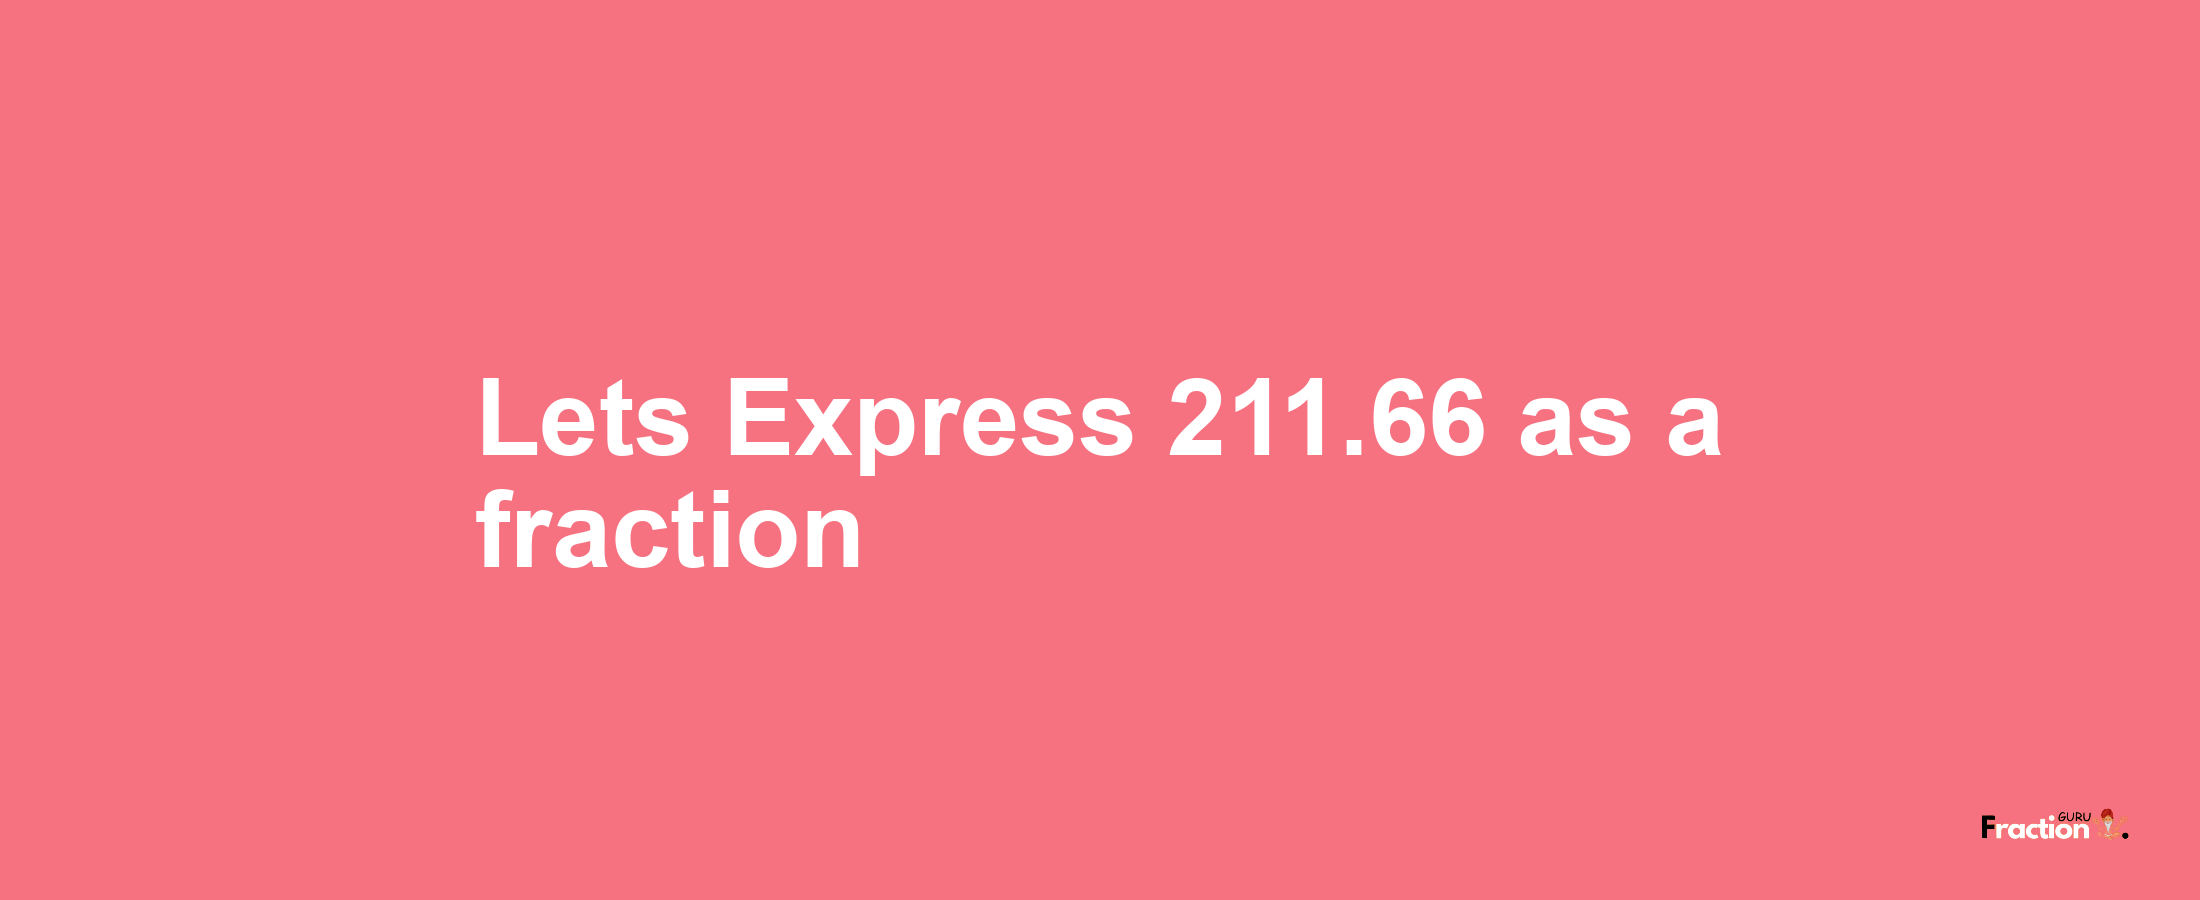 Lets Express 211.66 as afraction